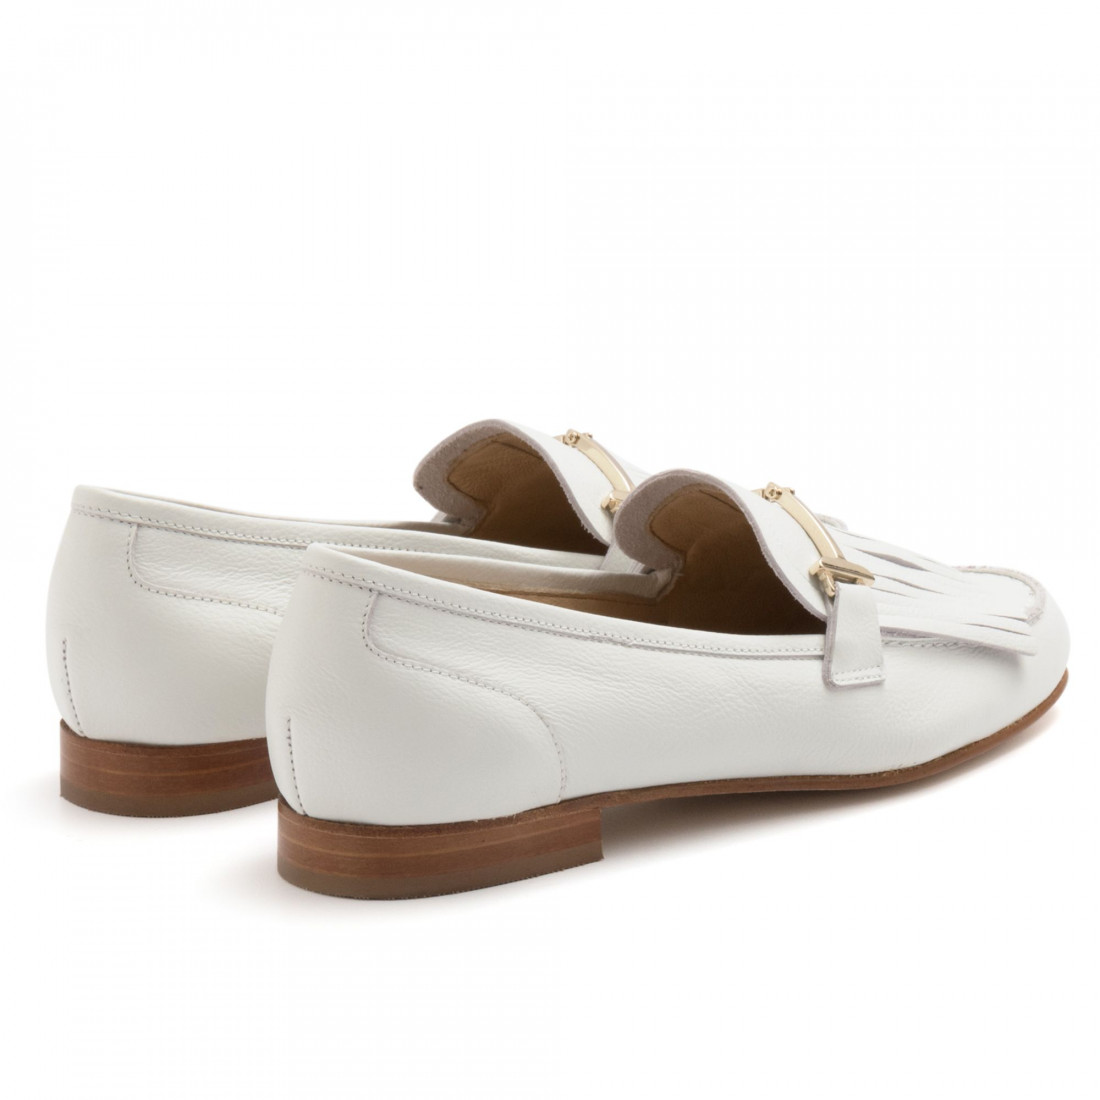 White leather Luca Grossi fringed mocassins with clamps